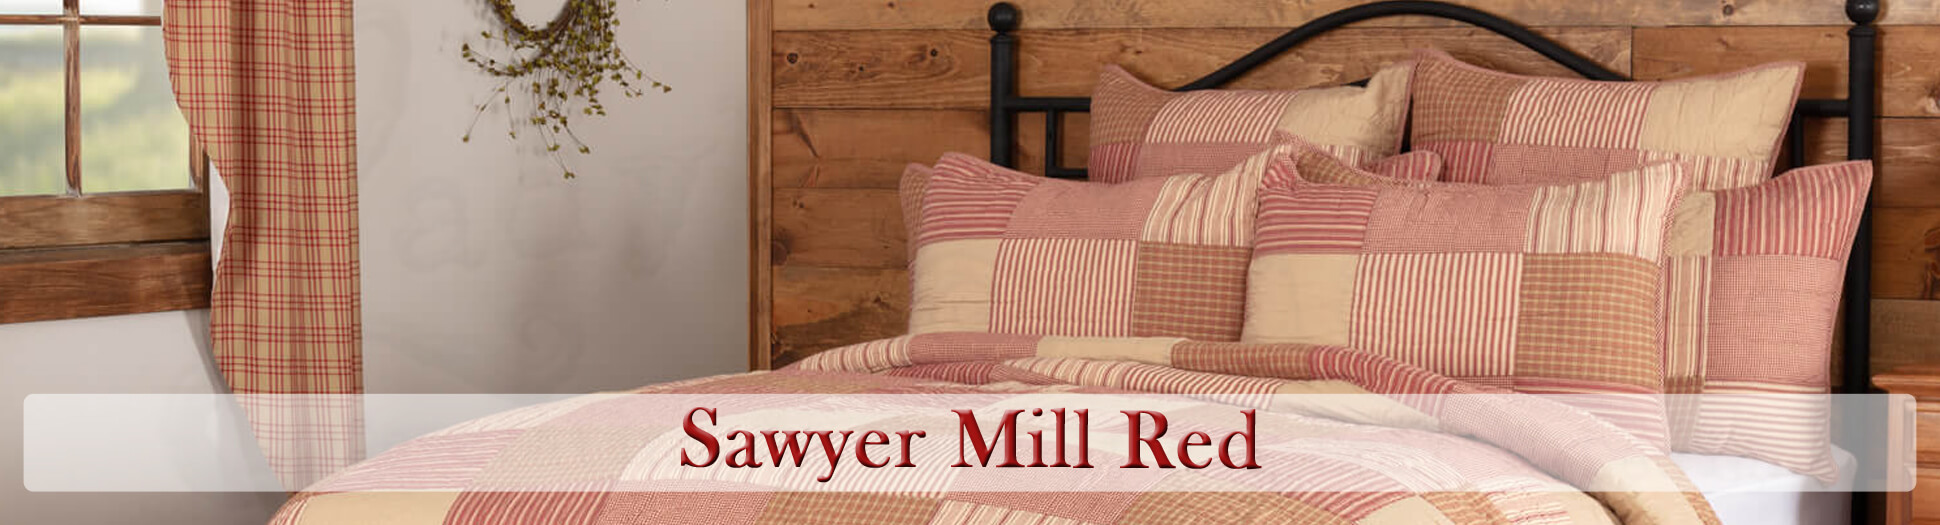 Shop Sawyer Mill Red by VHC Brands